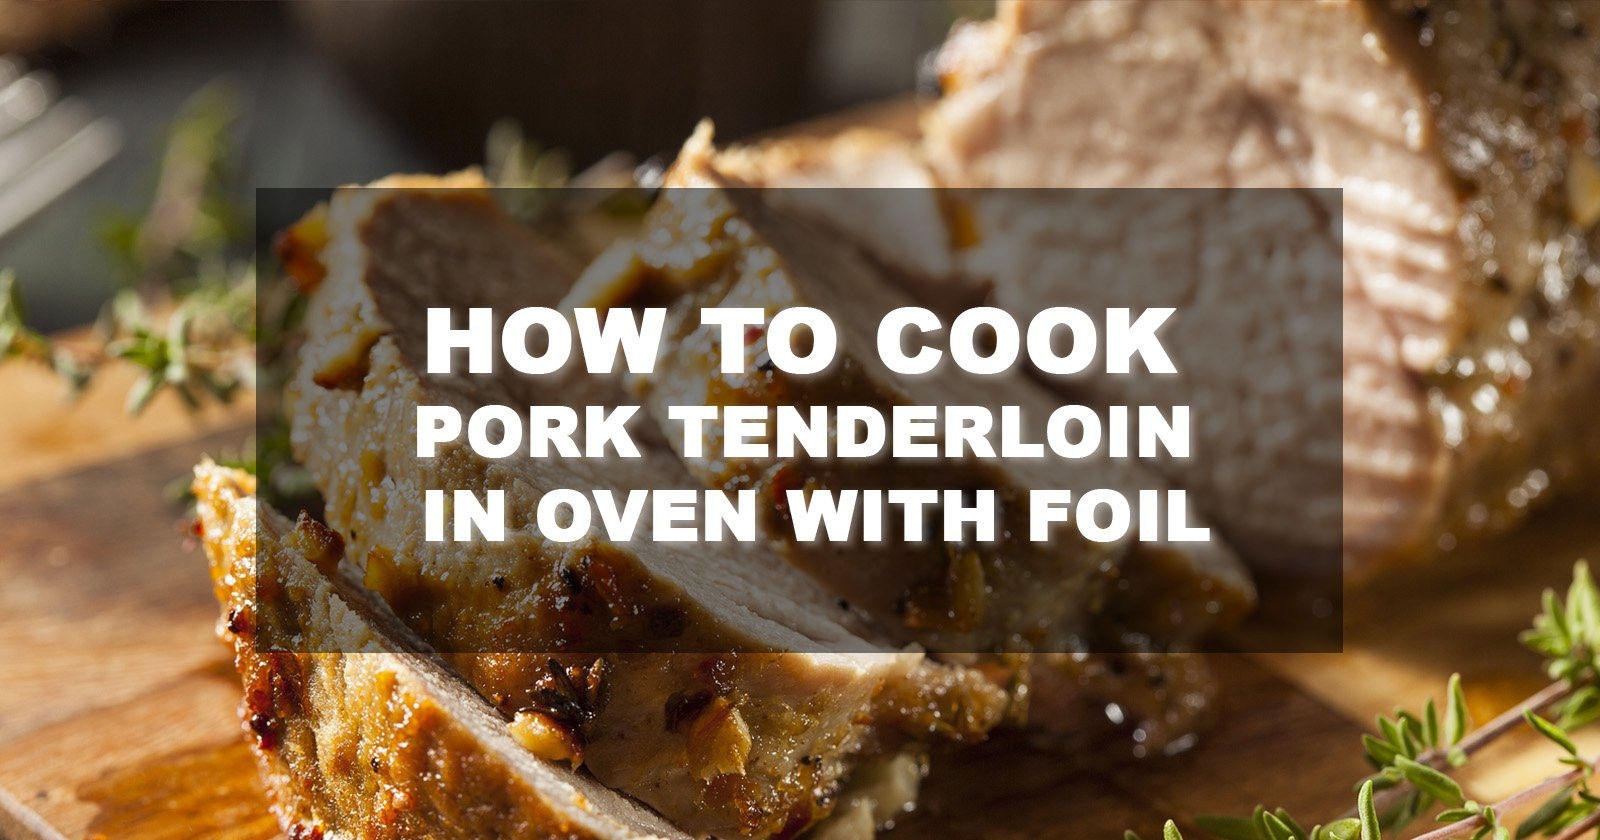 How To Cook A Pork Loin In The Oven
 How To Cook Pork Tenderloin In Oven With Foil FamilyNano